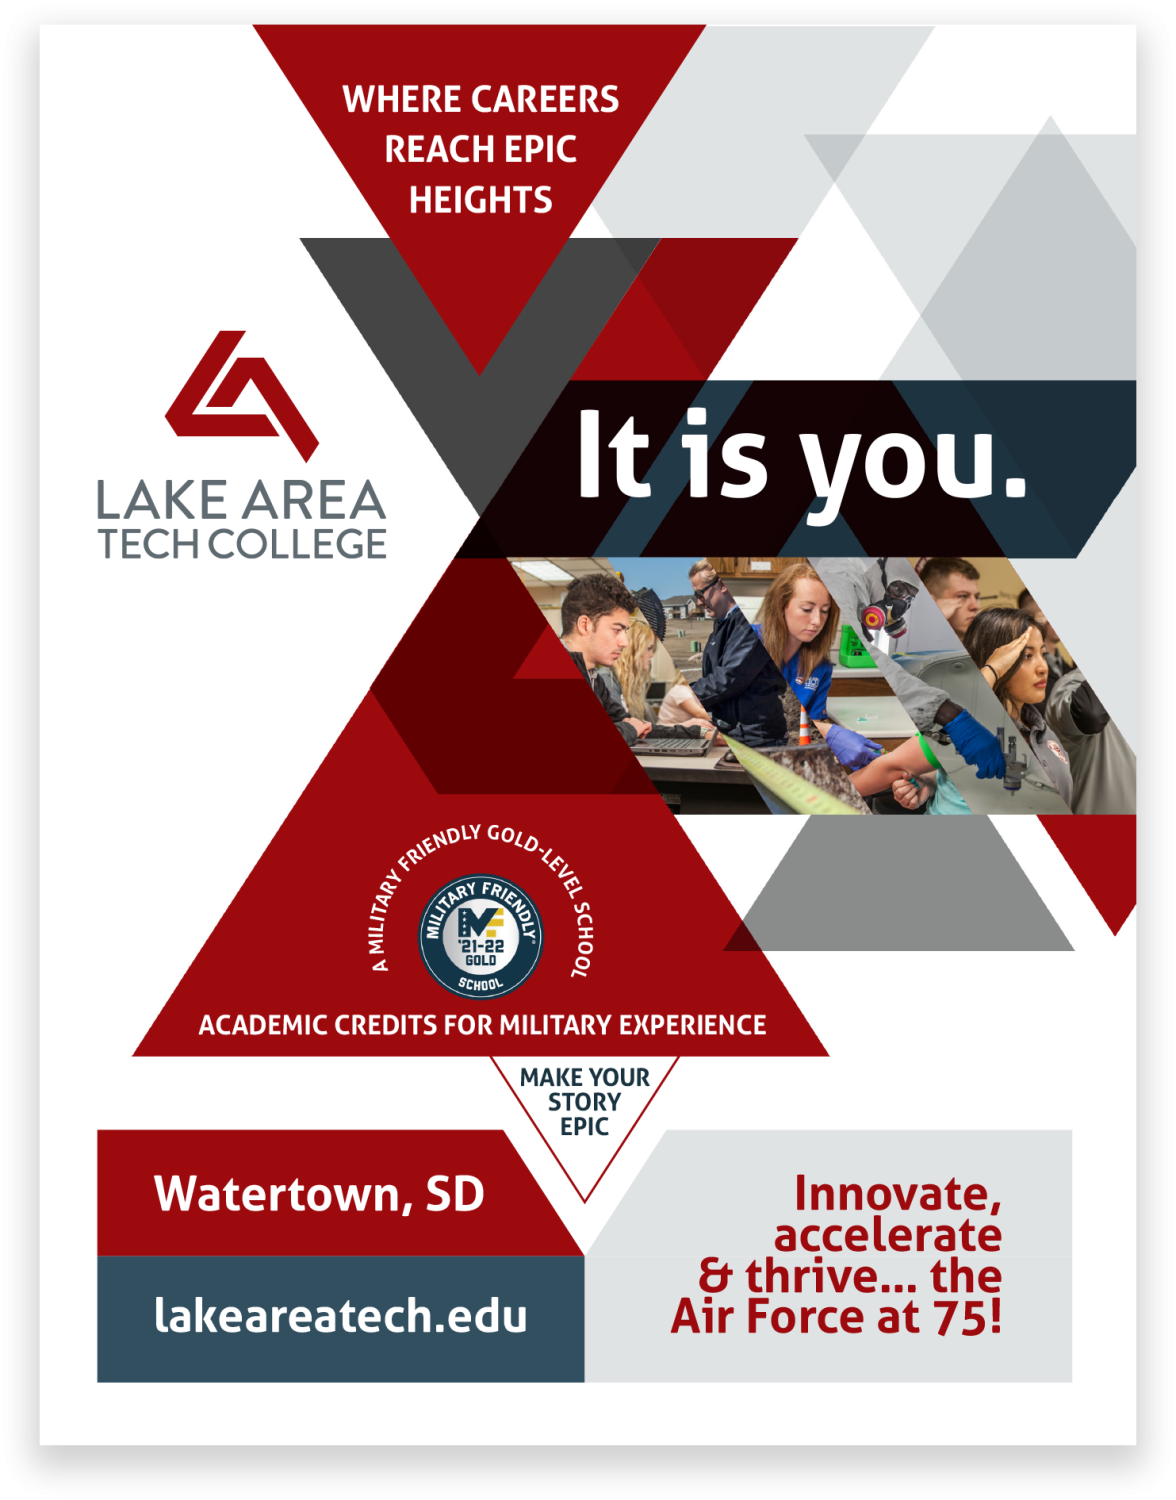 Lake Area Technical College Branded ad | Insight Marketing Design Brand Stories